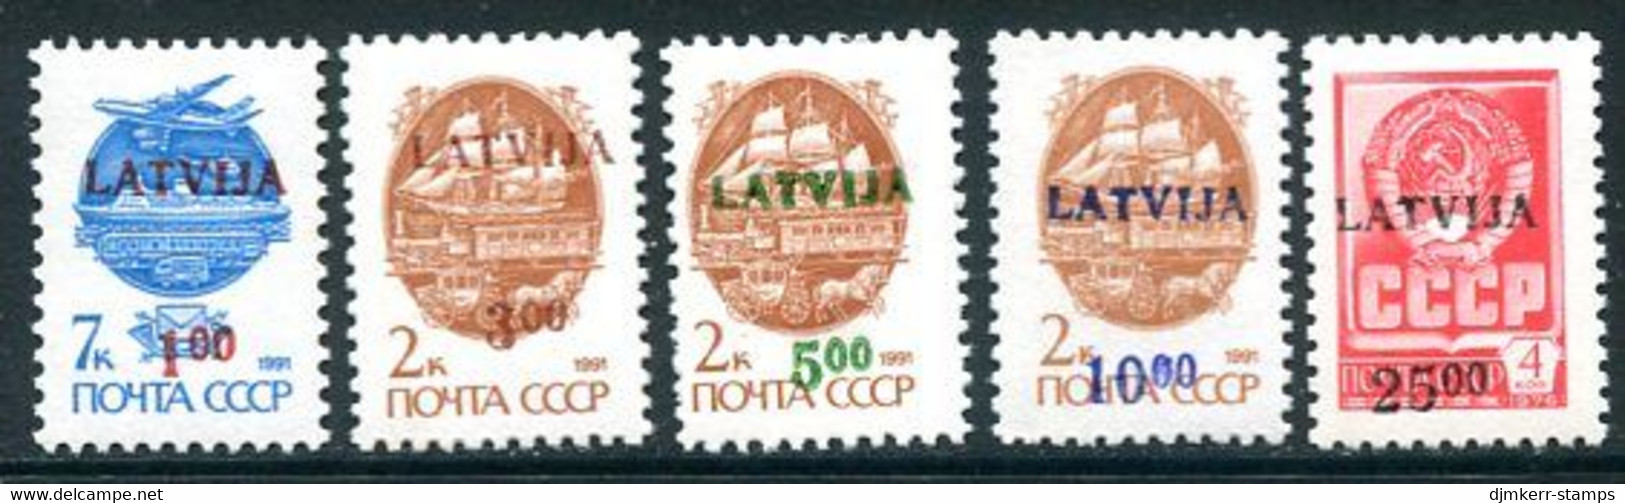 LATVIA 1992 Provisional Surcharges II MNH / **.  Michel 335-39 - Lettland